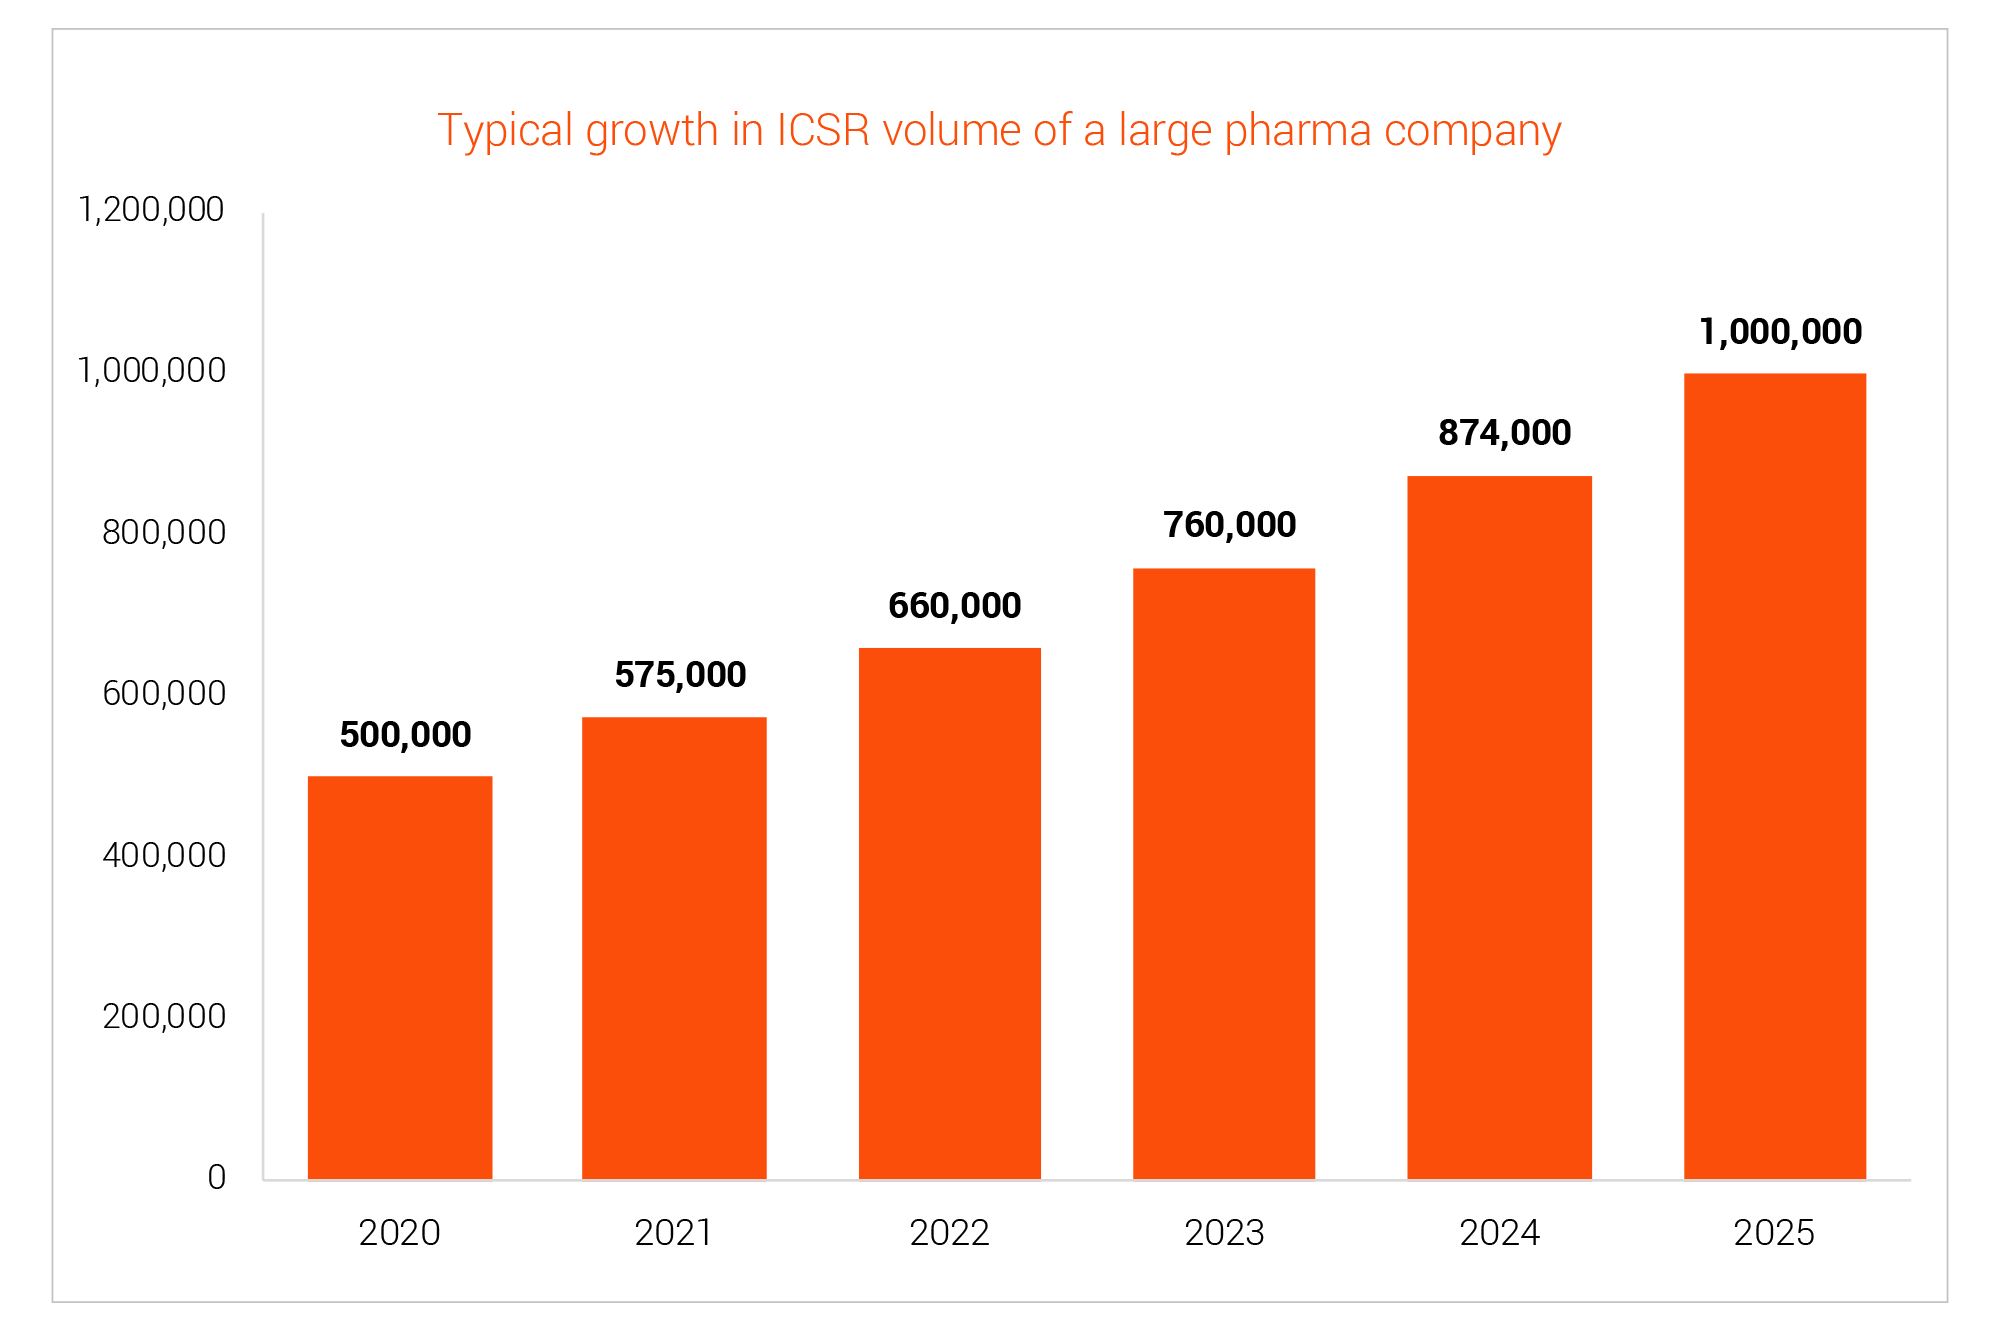 Typical growth in ICSR volume of a large pharma company 